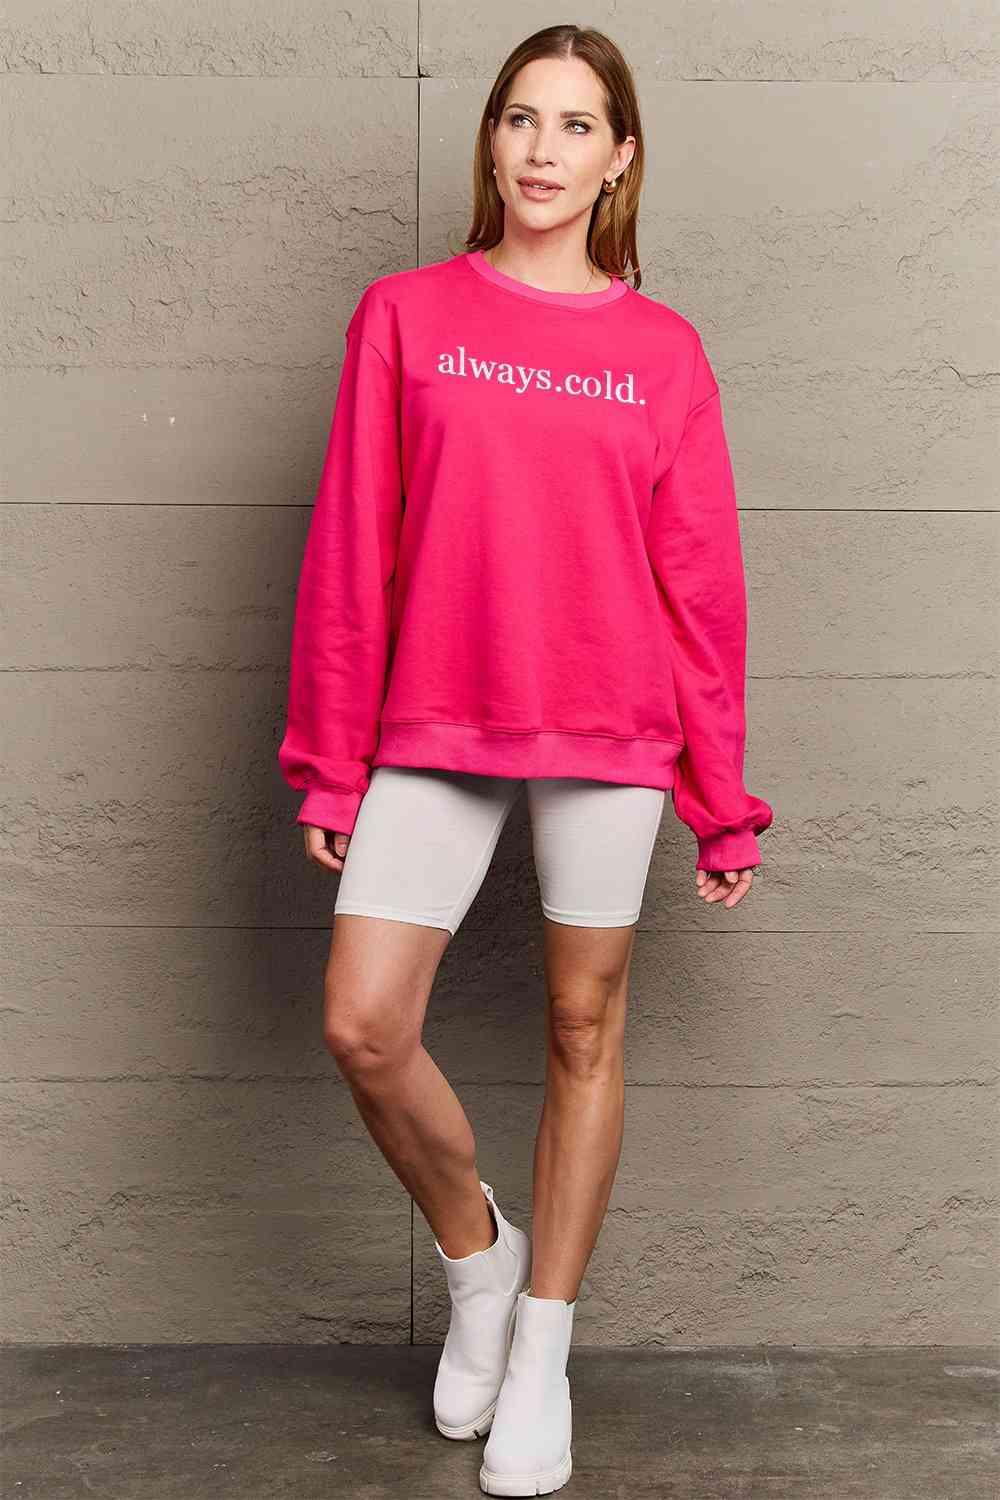 Simply Love Full Size ALWAYS.COLD. Graphic Sweatshirt - Ash Boutique